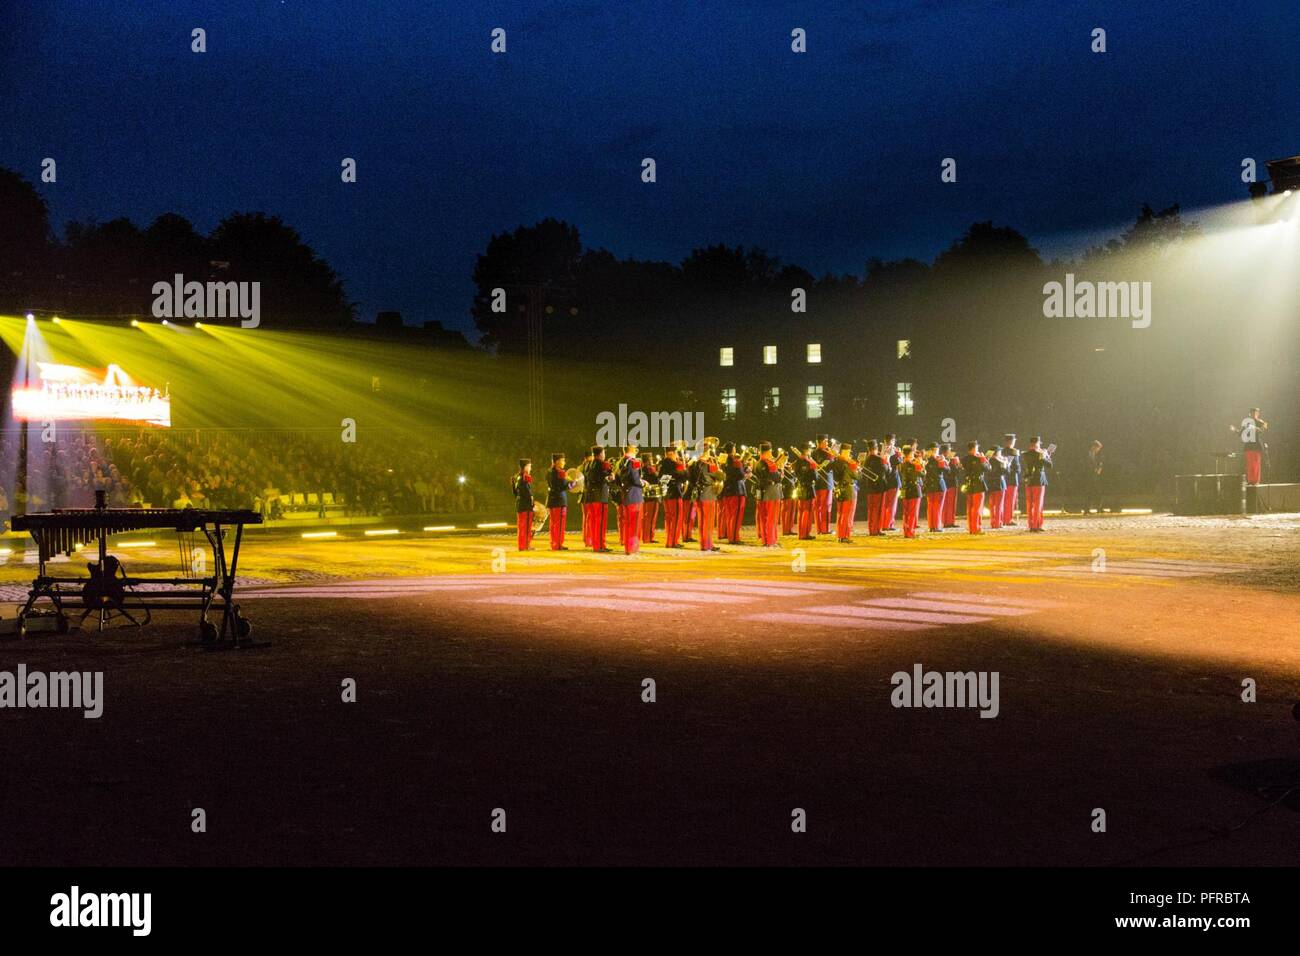 The Armee de Terre performs at the Citadelle 350 anniversary military show, May 25, 2018, Lille, France.  US Army Stock Photo